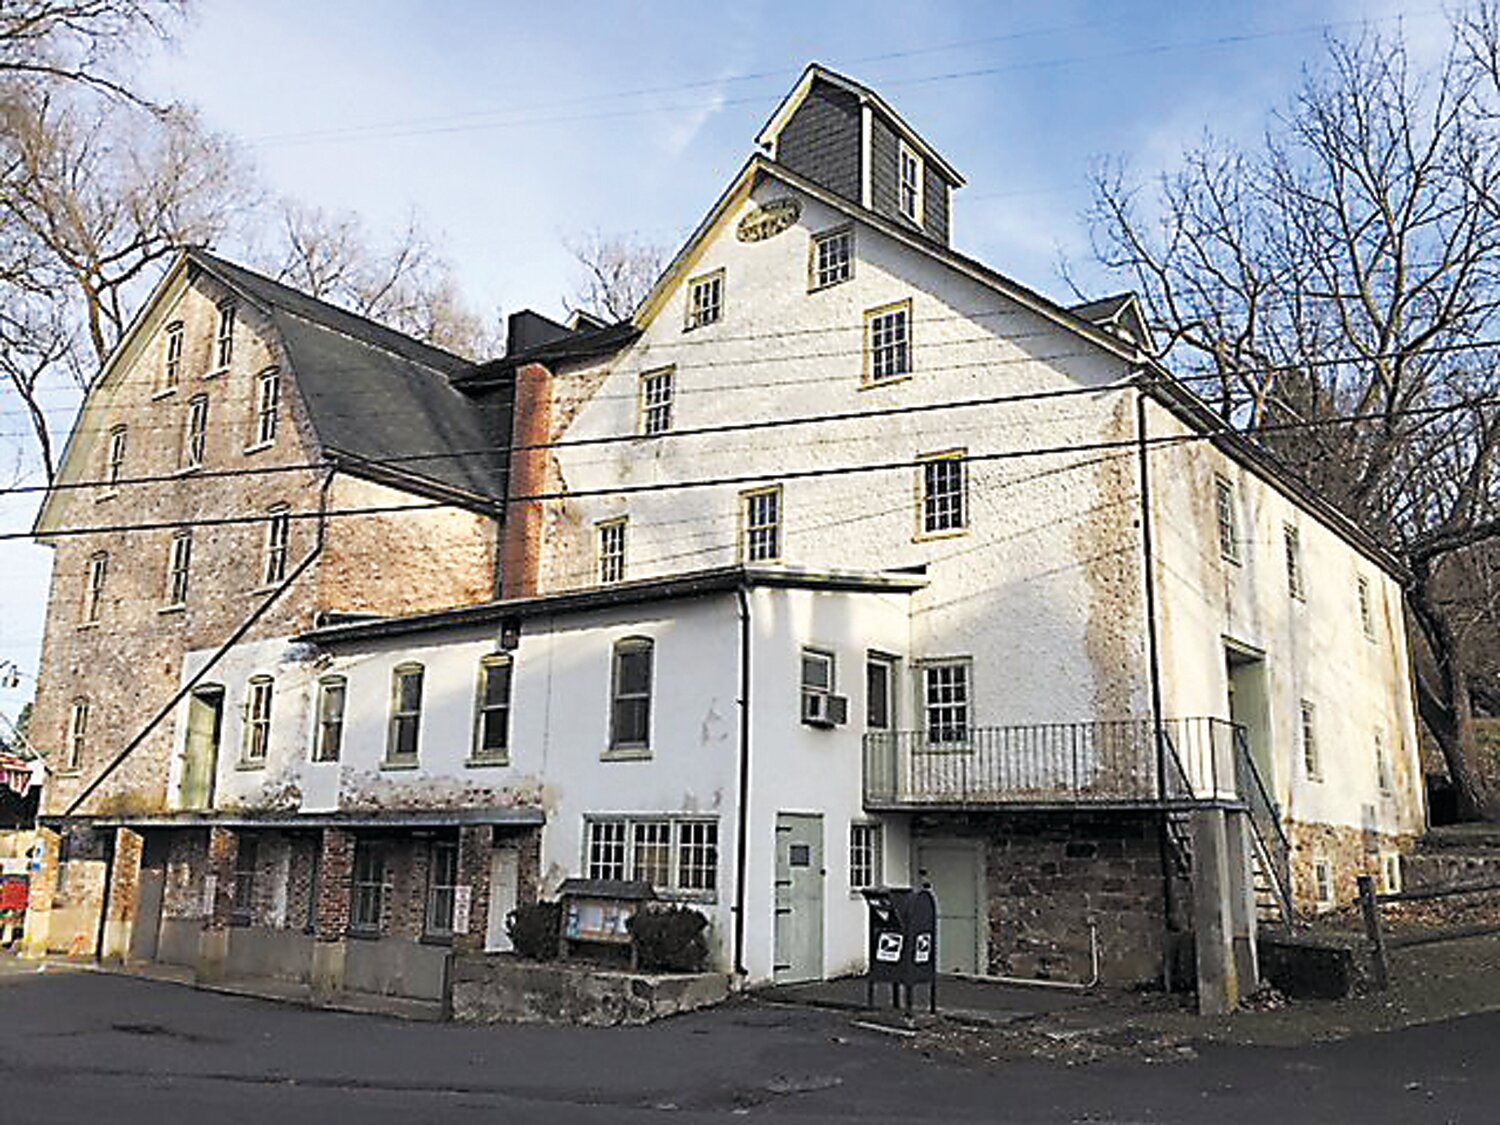 The Durham Grist Mill in the center of the Village of Durham was built in 1820.